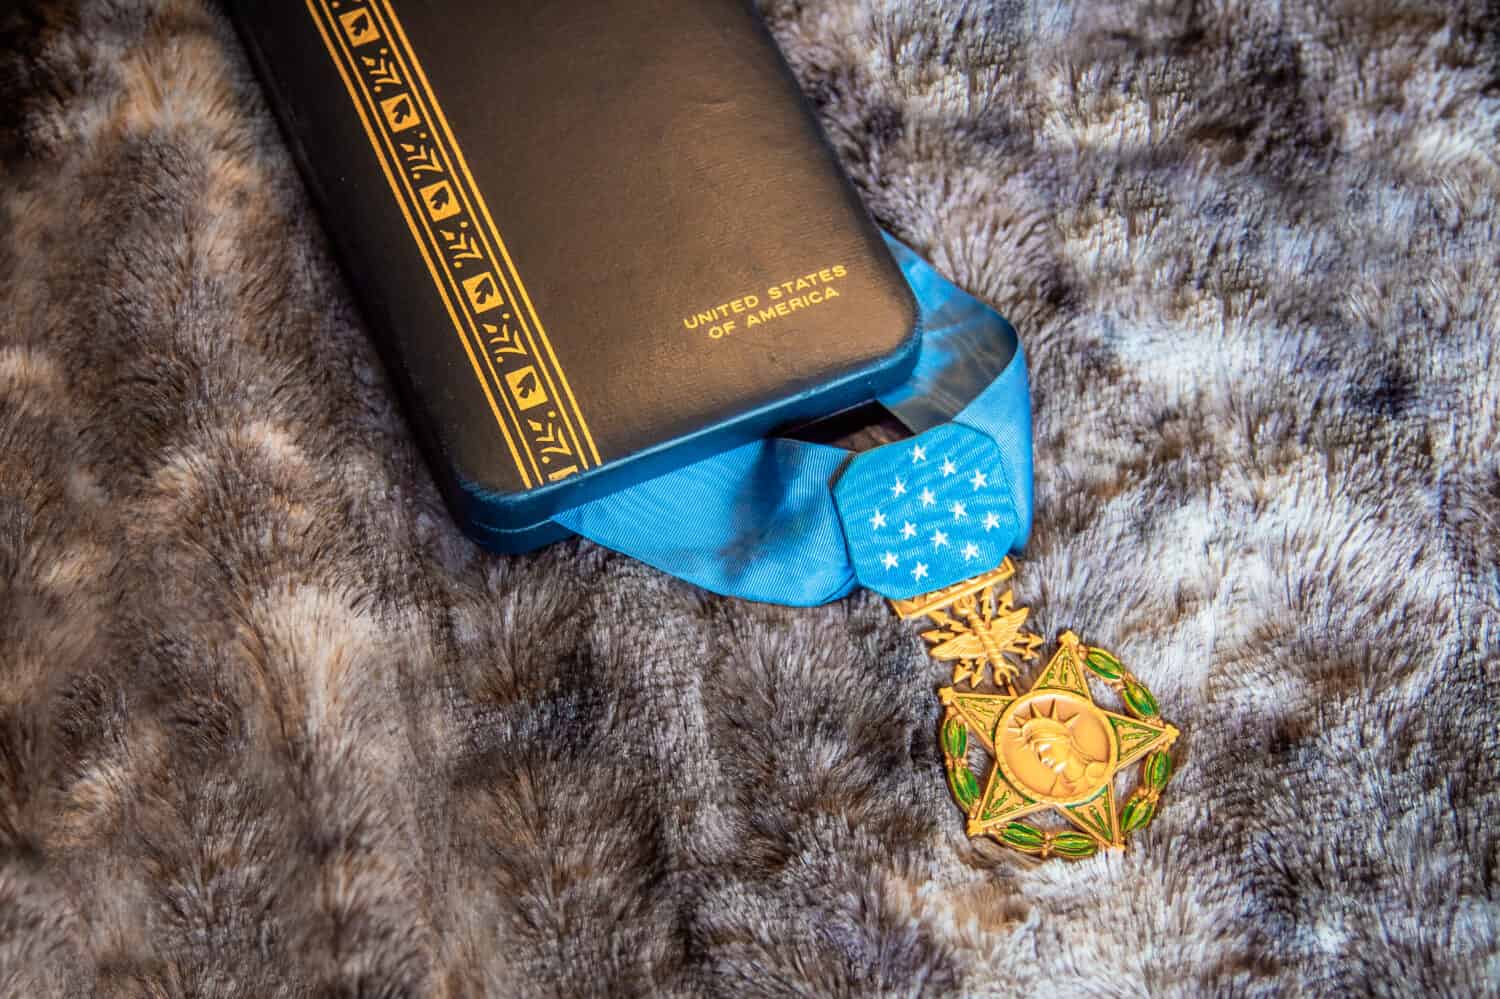 United States Air Force medal of honor with case.